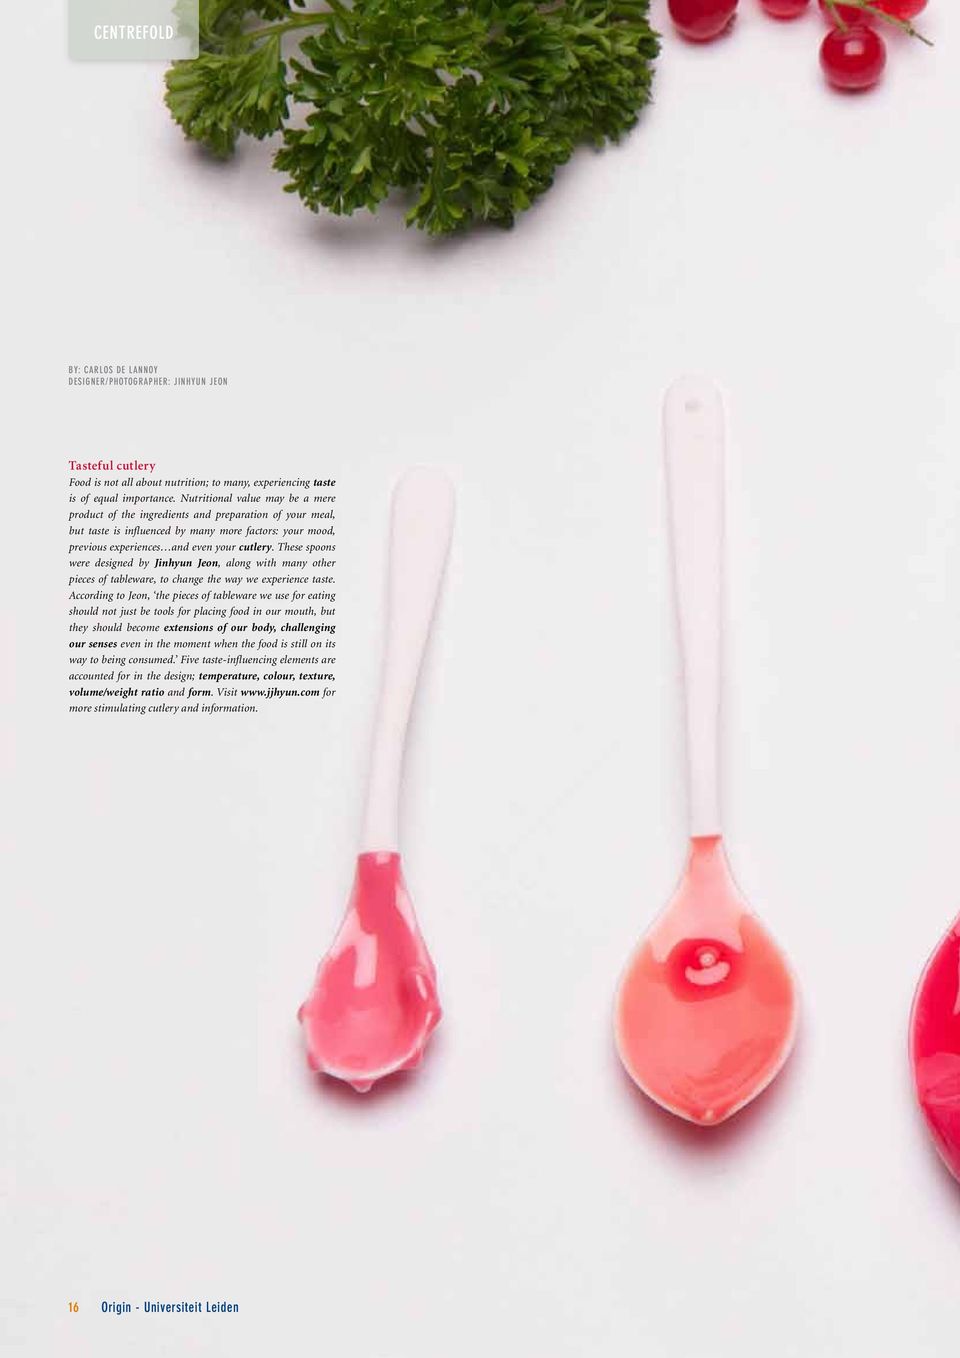 These spoons were designed by Jinhyun Jeon, along with many other pieces of tableware, to change the way we experience taste.